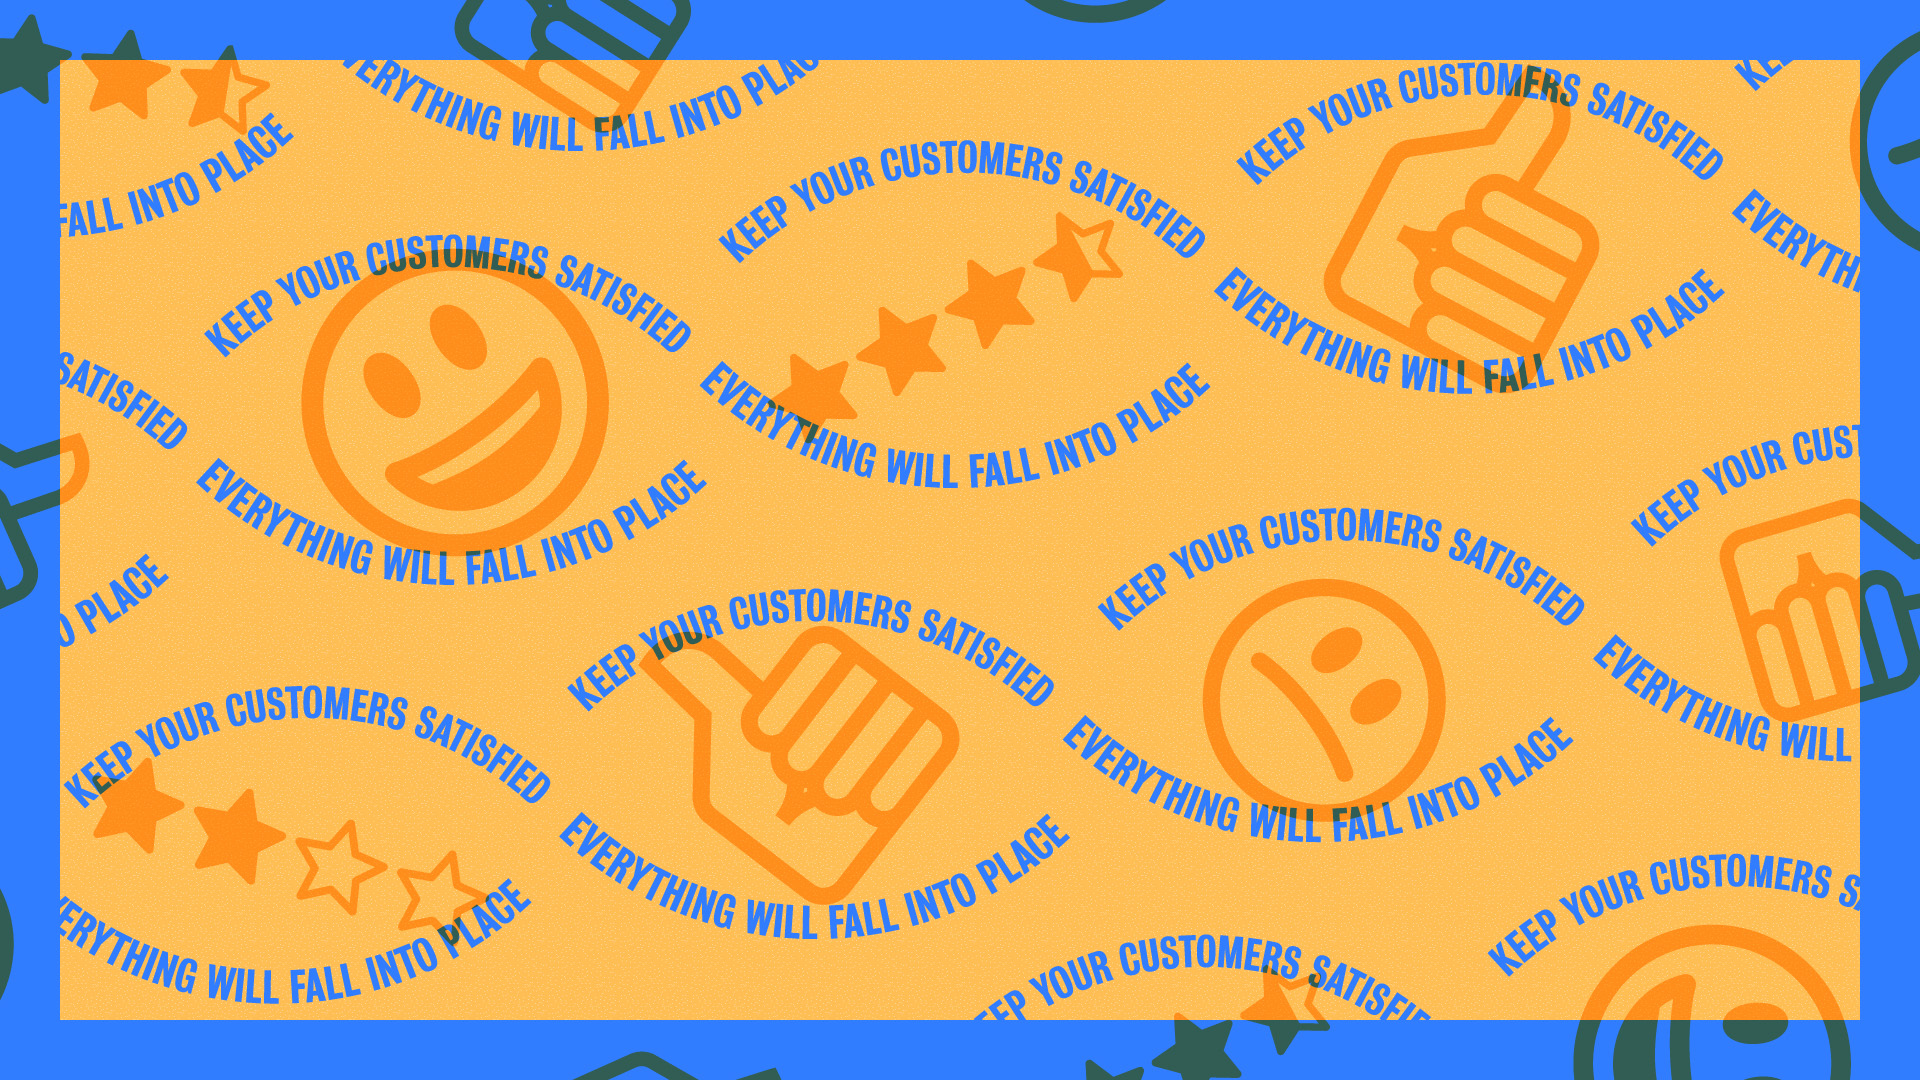 Why Product Managers Should Be Fully Customer Oriented - graphic